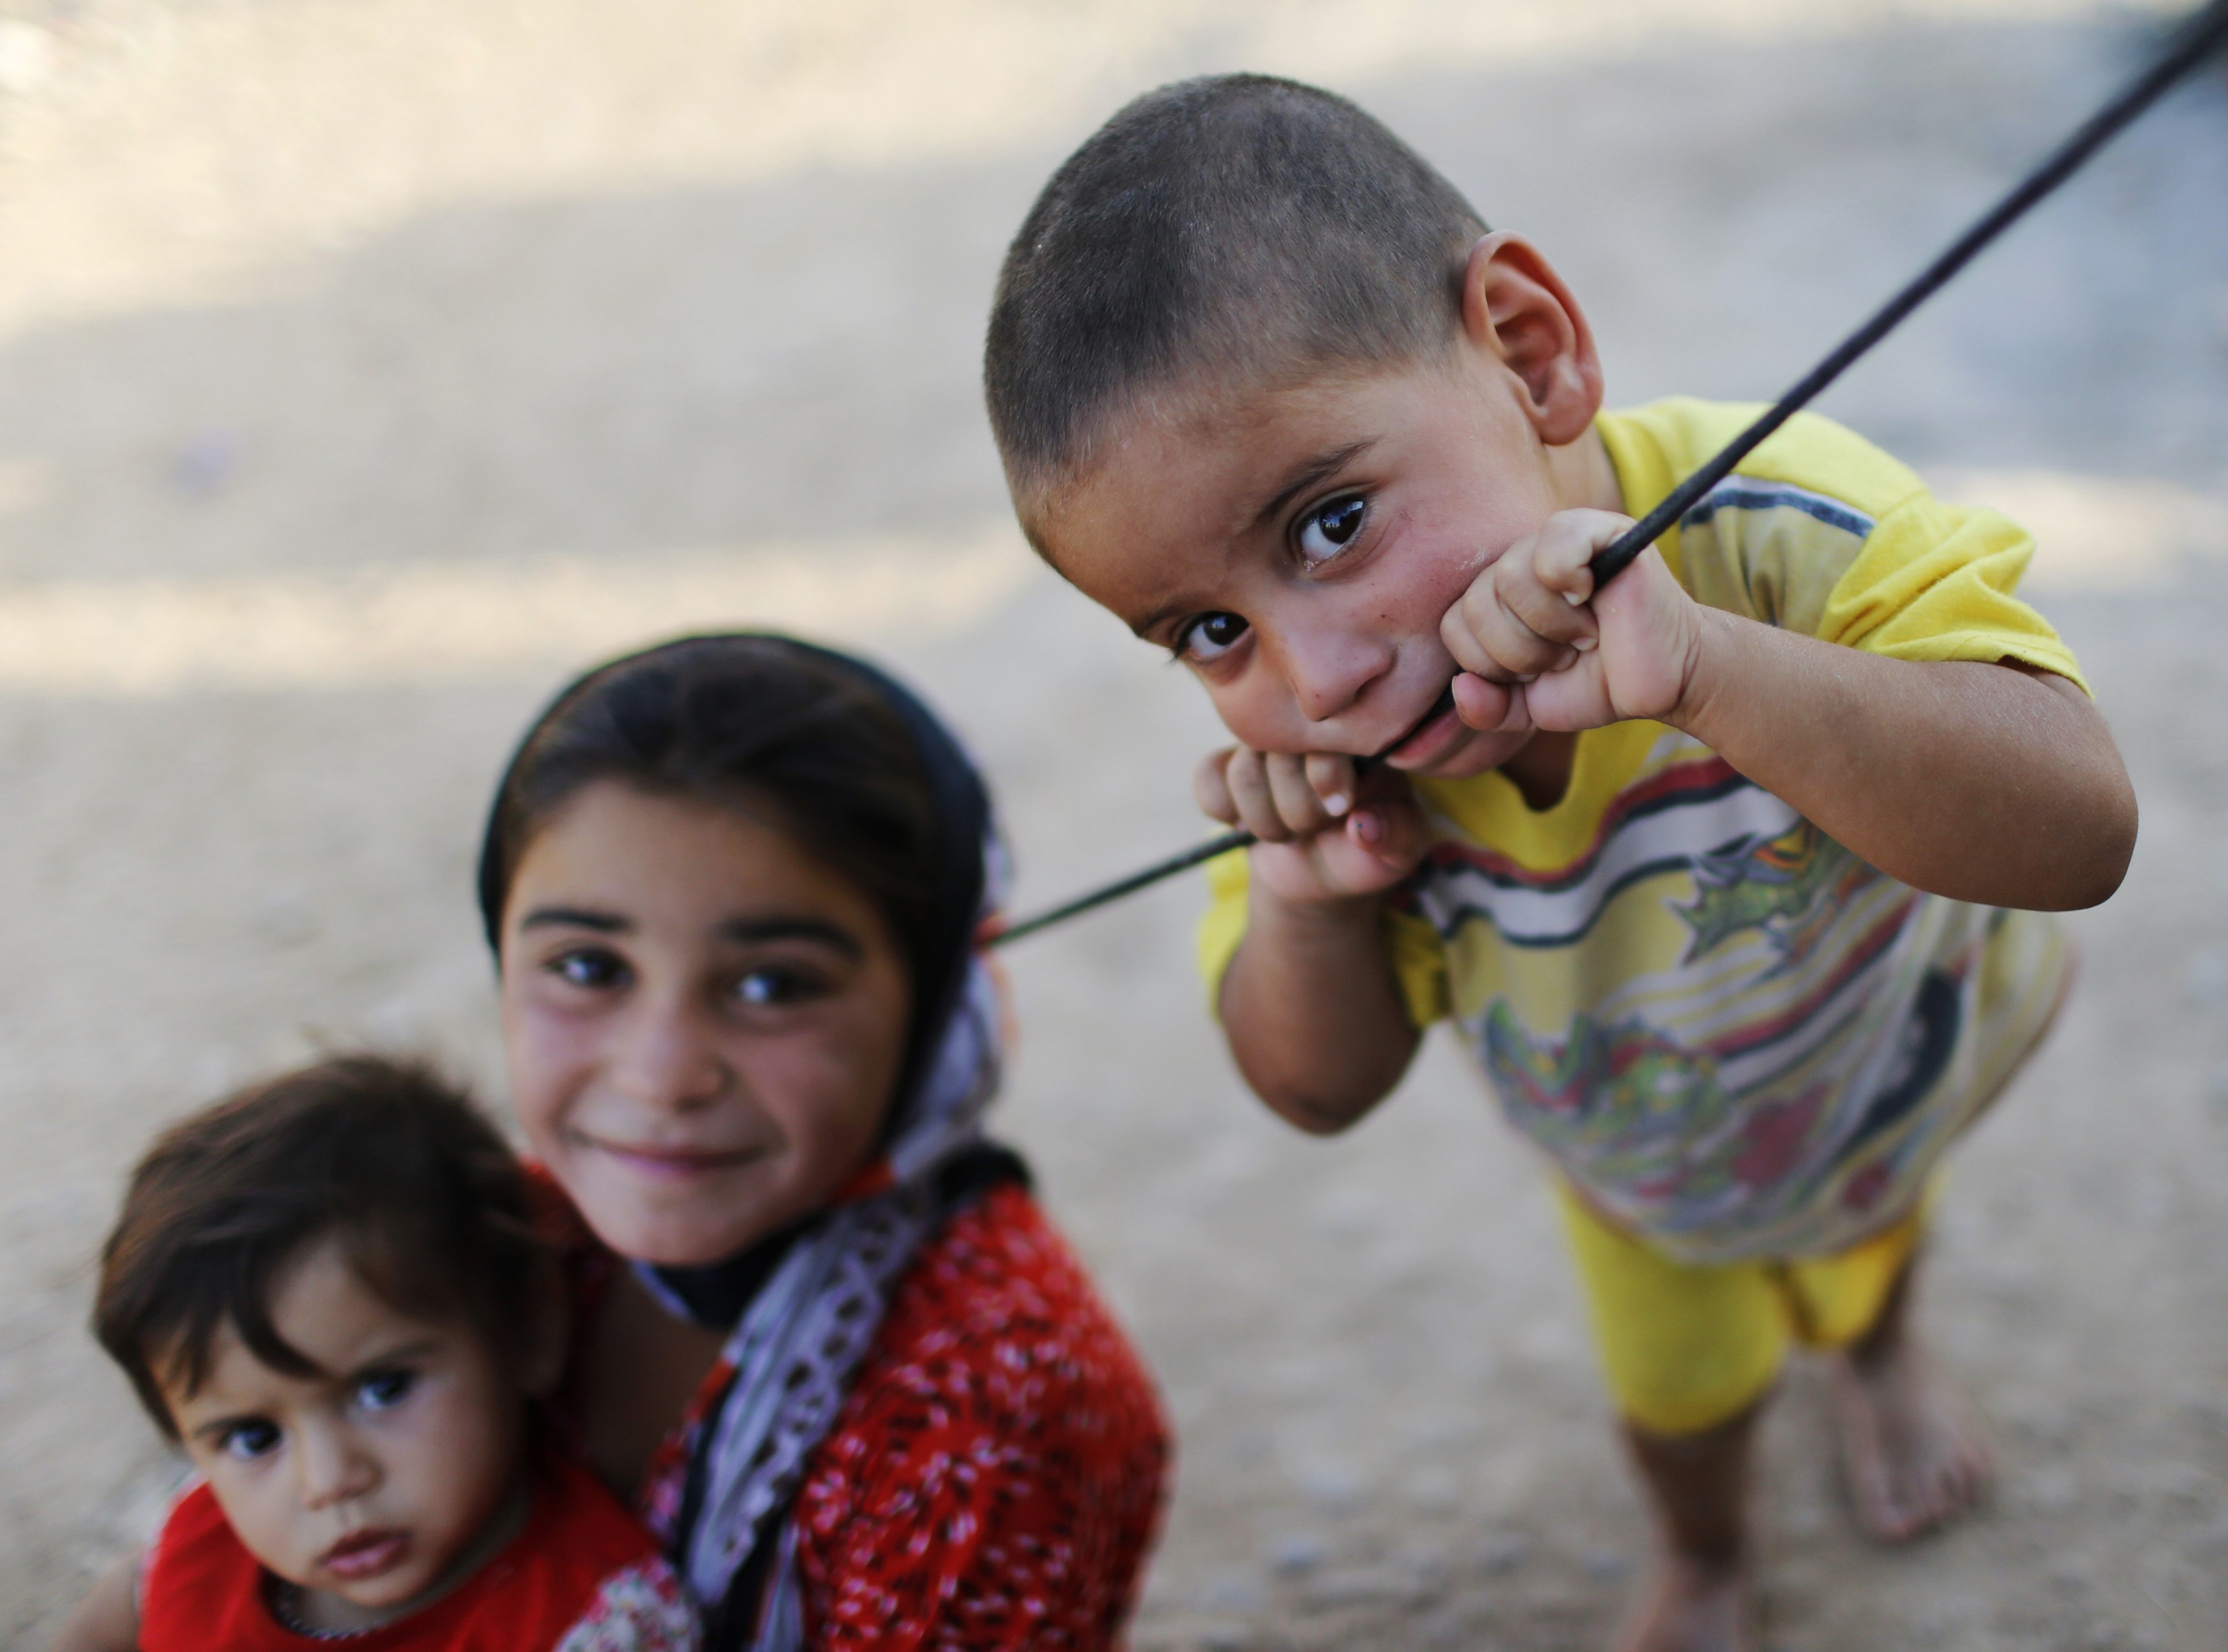 Displaced Iraqi children, who fled from Islamic Sate violence in Mosul, play outside their tent at Baherka refugee camp in Erbil September 14, 2014. REUTERS/Ahmed Jadallah (IRAQ - Tags: CIVIL UNREST CONFLICT SOCIETY)